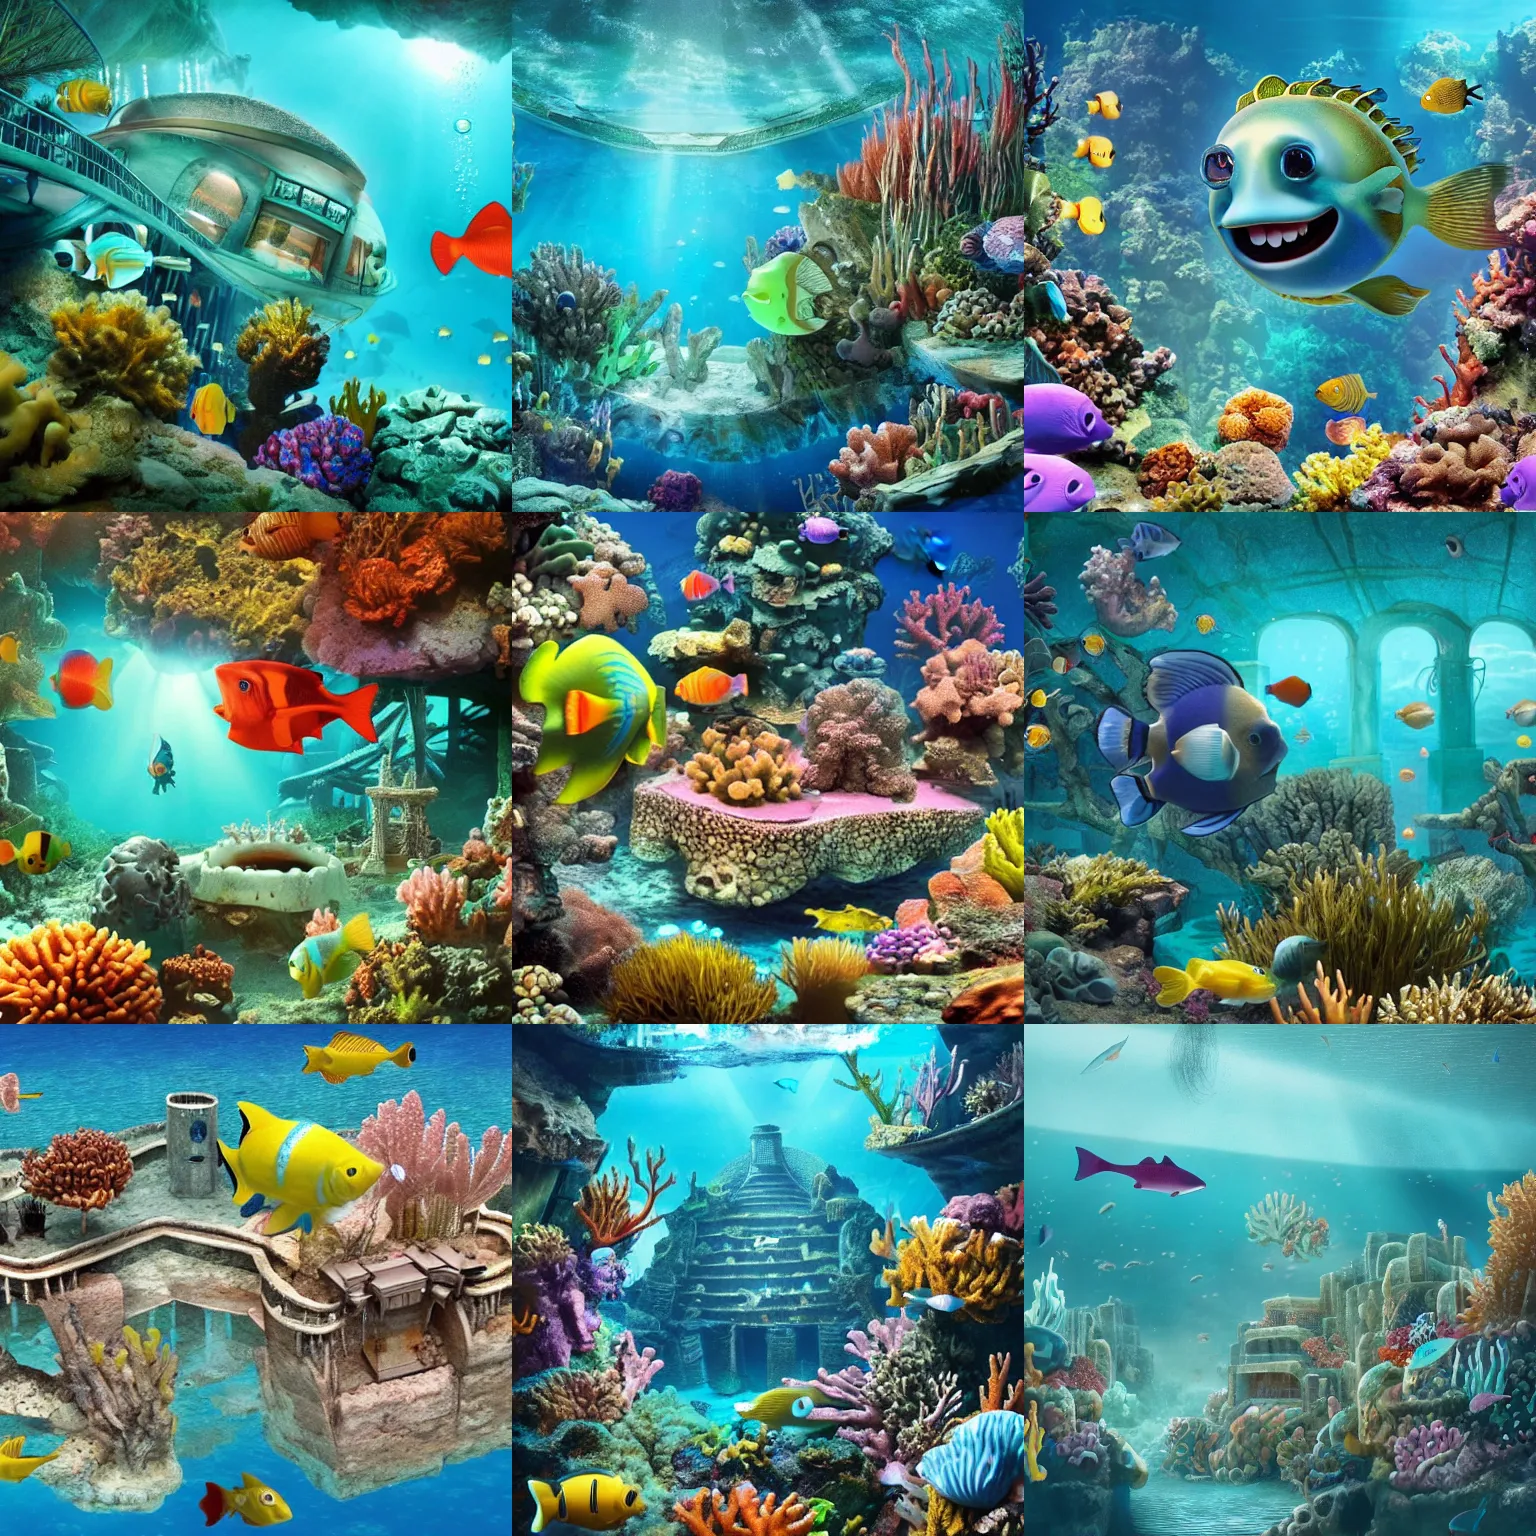 Prompt: an underwater utopian society built deep underwater that is built on the back of a long lost ruined city that is filled with anthropomorphic fish citizens and is the only source of light in the scene, bubbles, coral, fish, atmospheric, aesthetic, paradise, high resolution, cinematic